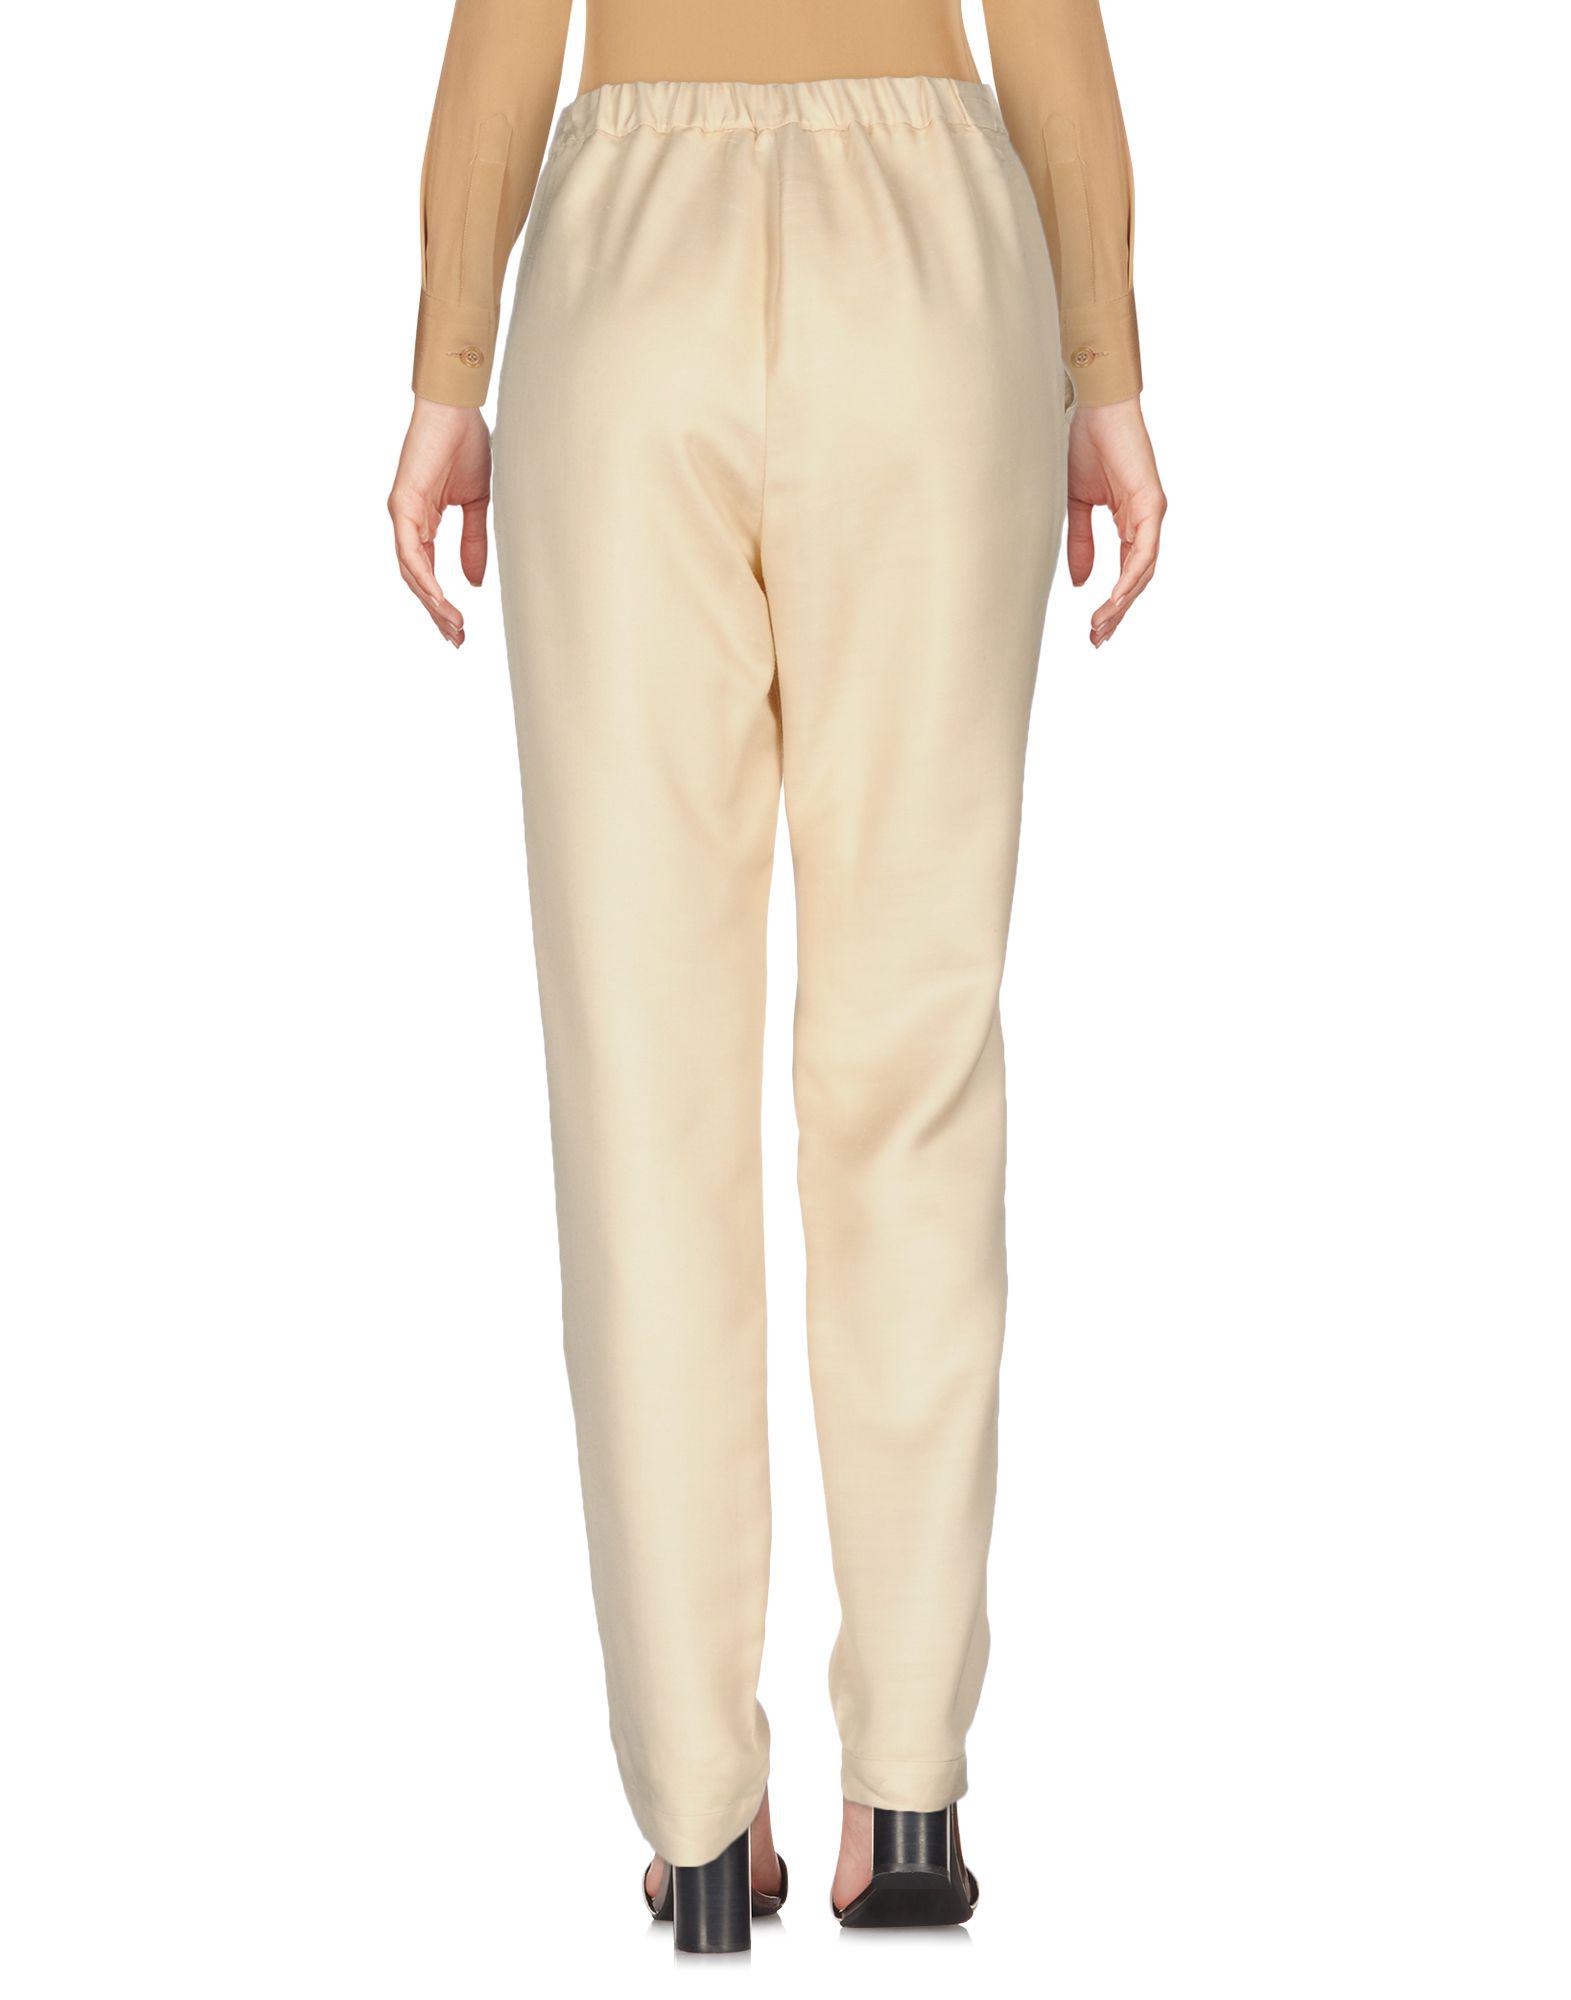 Momoní Flannel Casual Pants in Ivory (White) - Lyst